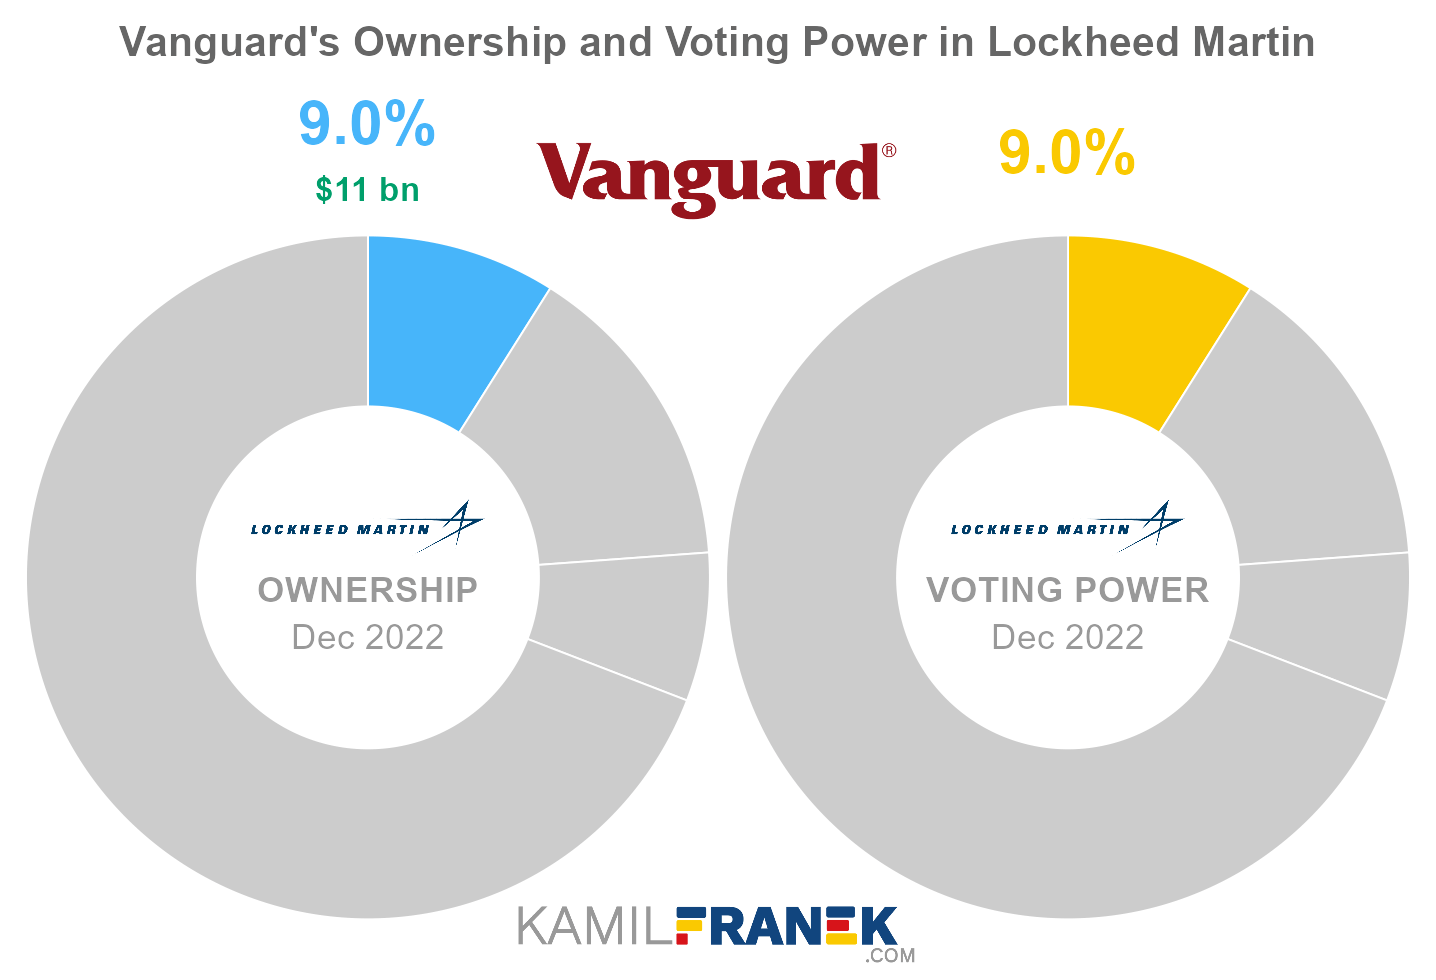 Vanguard's share ownership and voting power in Lockheed Martin (chart)